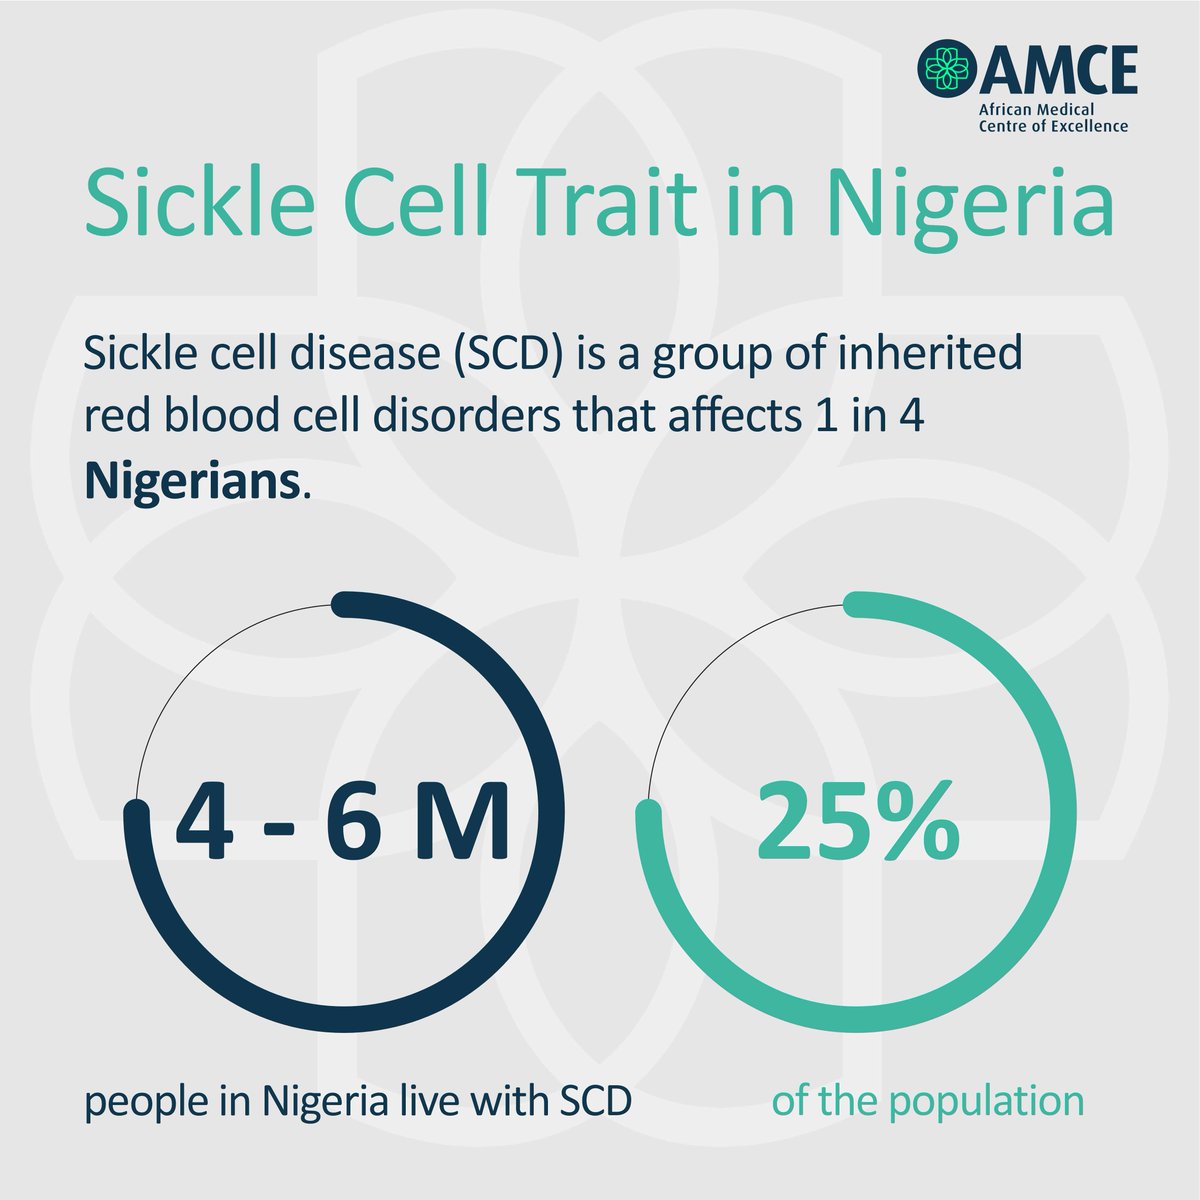 Did you know 1 in 4 Nigerians carries the sickle cell trait? That's 4-6 million people living with sickle cell disease (SCD). Nigeria accounts for 100,000-150,000 newborns with SCD annually, 33% of the global burden. #AMCE is revolutionising SCD treatment. 

#SickleCellAwareness